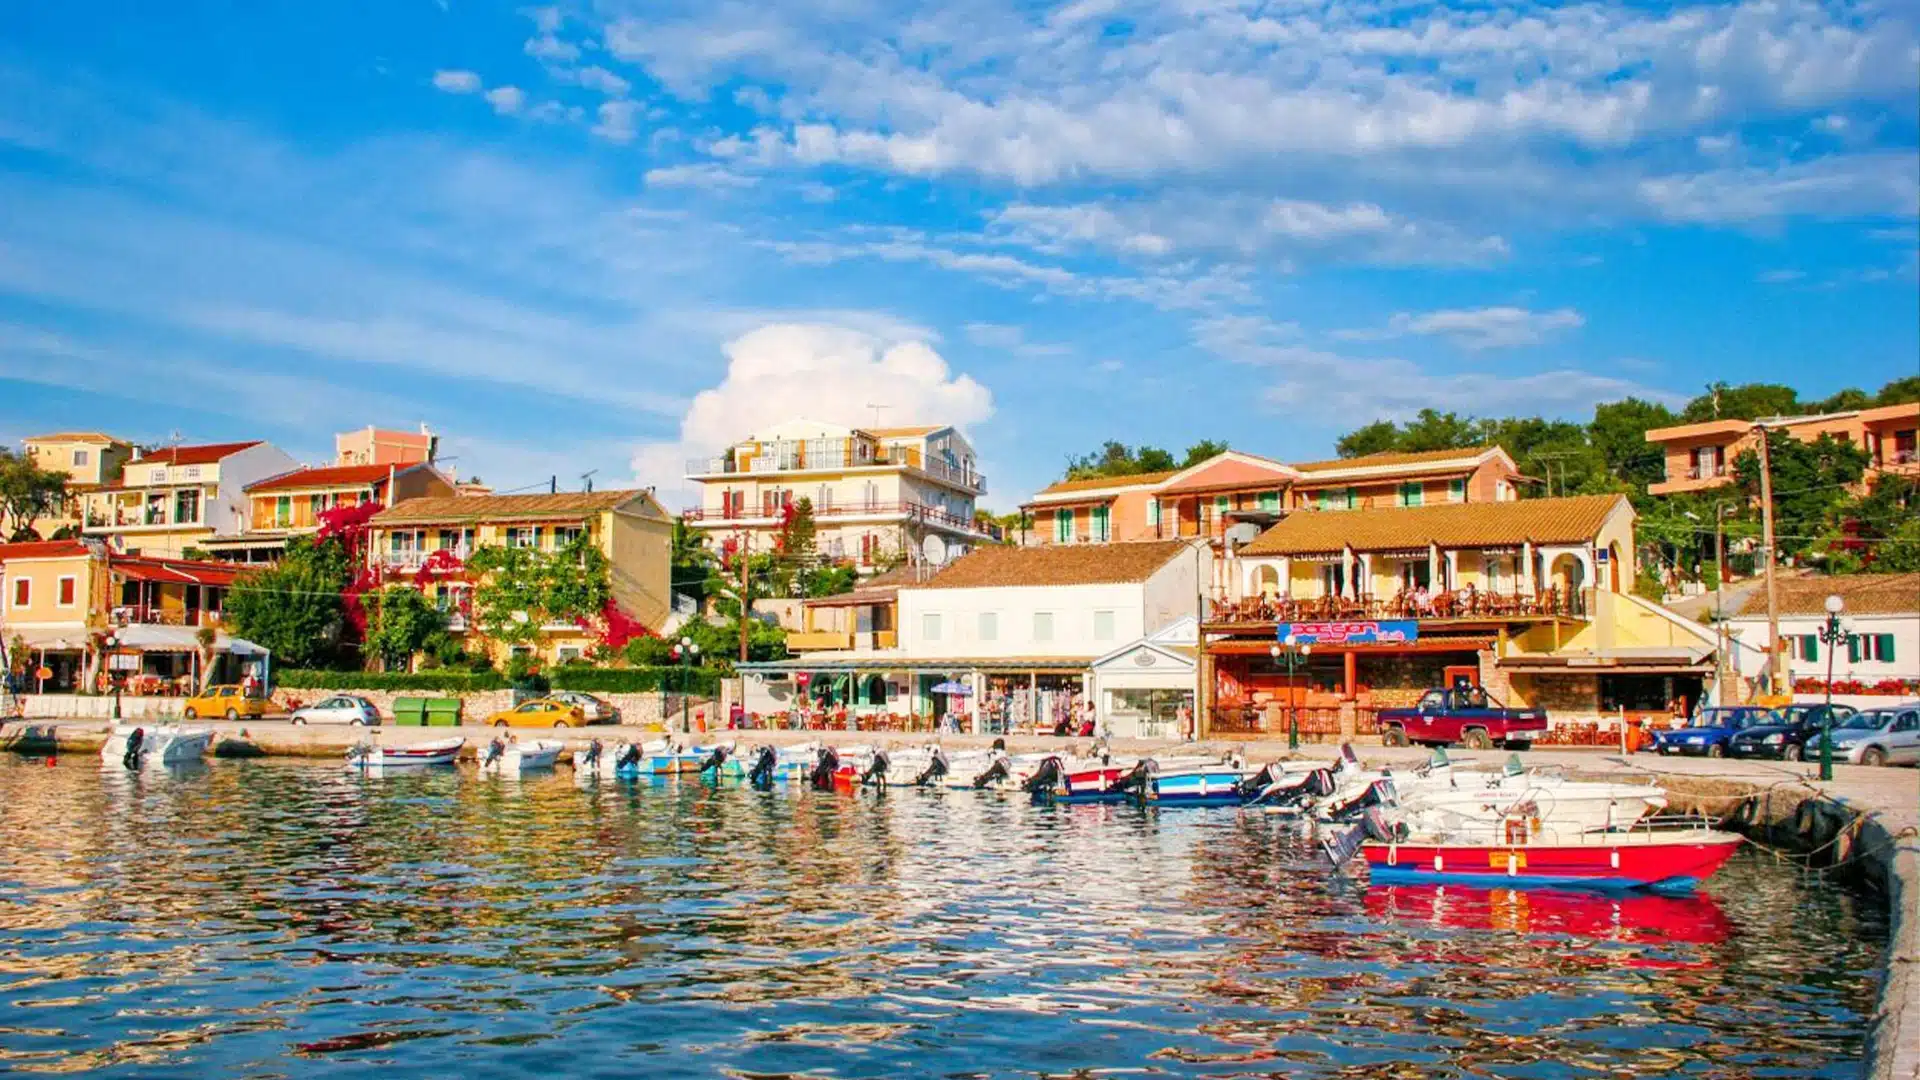 The picturesque port of Kassiopi